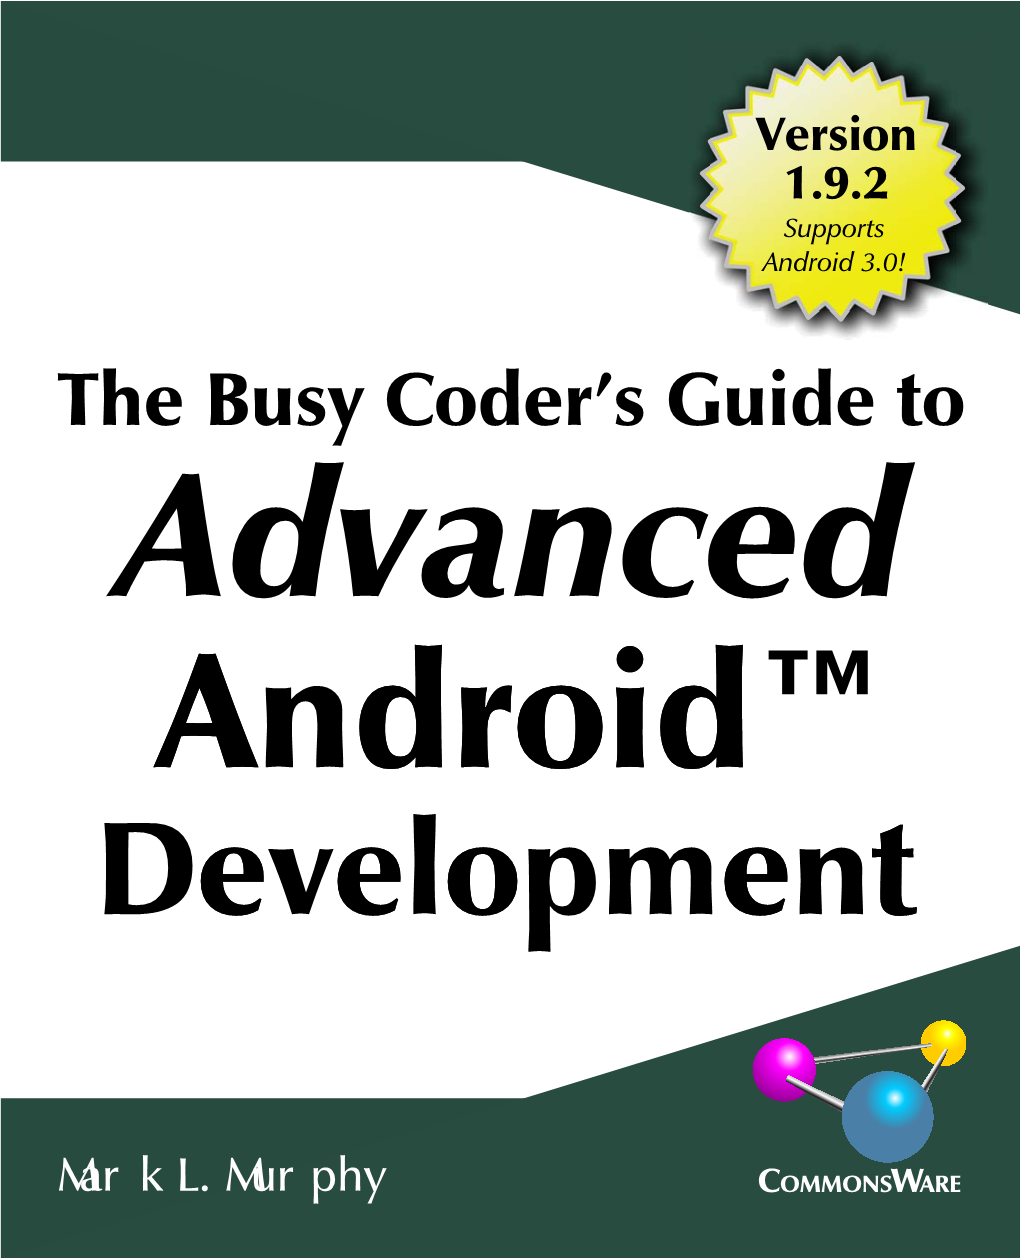 The Busy Coder's Guide to Advanced Android Development Version 1.9.2